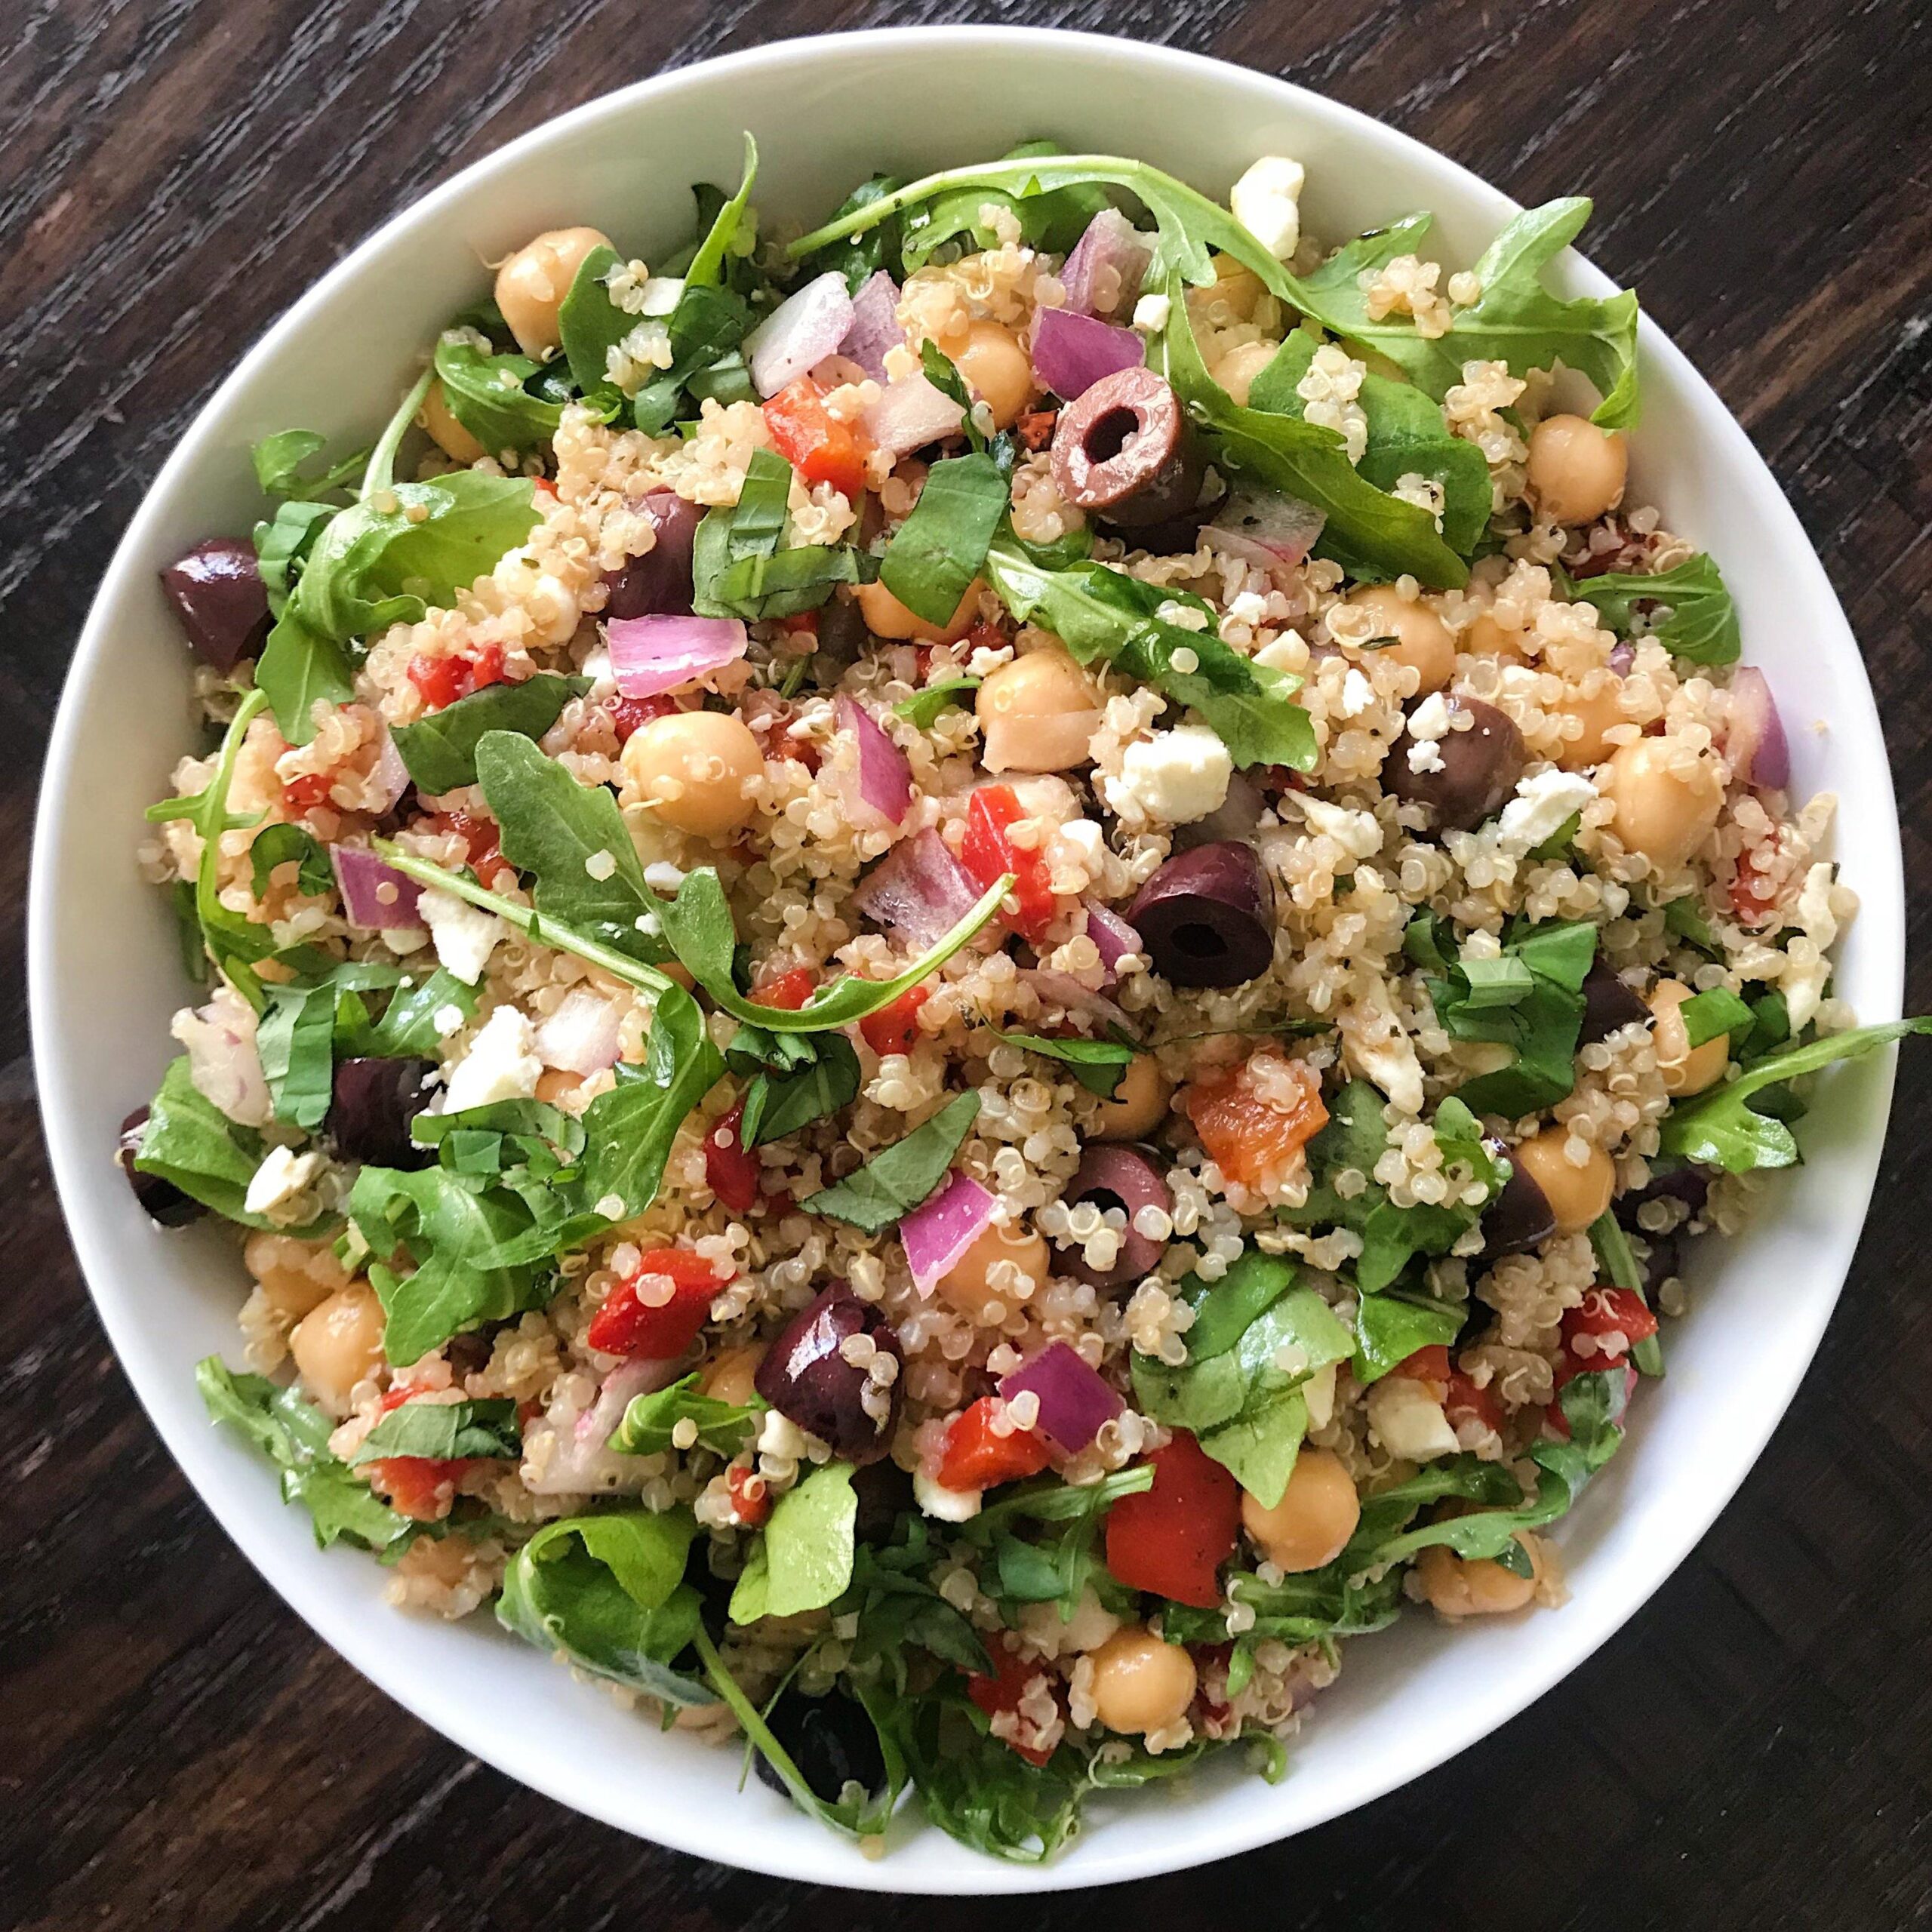  This colorful quinoa salad is giving me major summer vibes ????